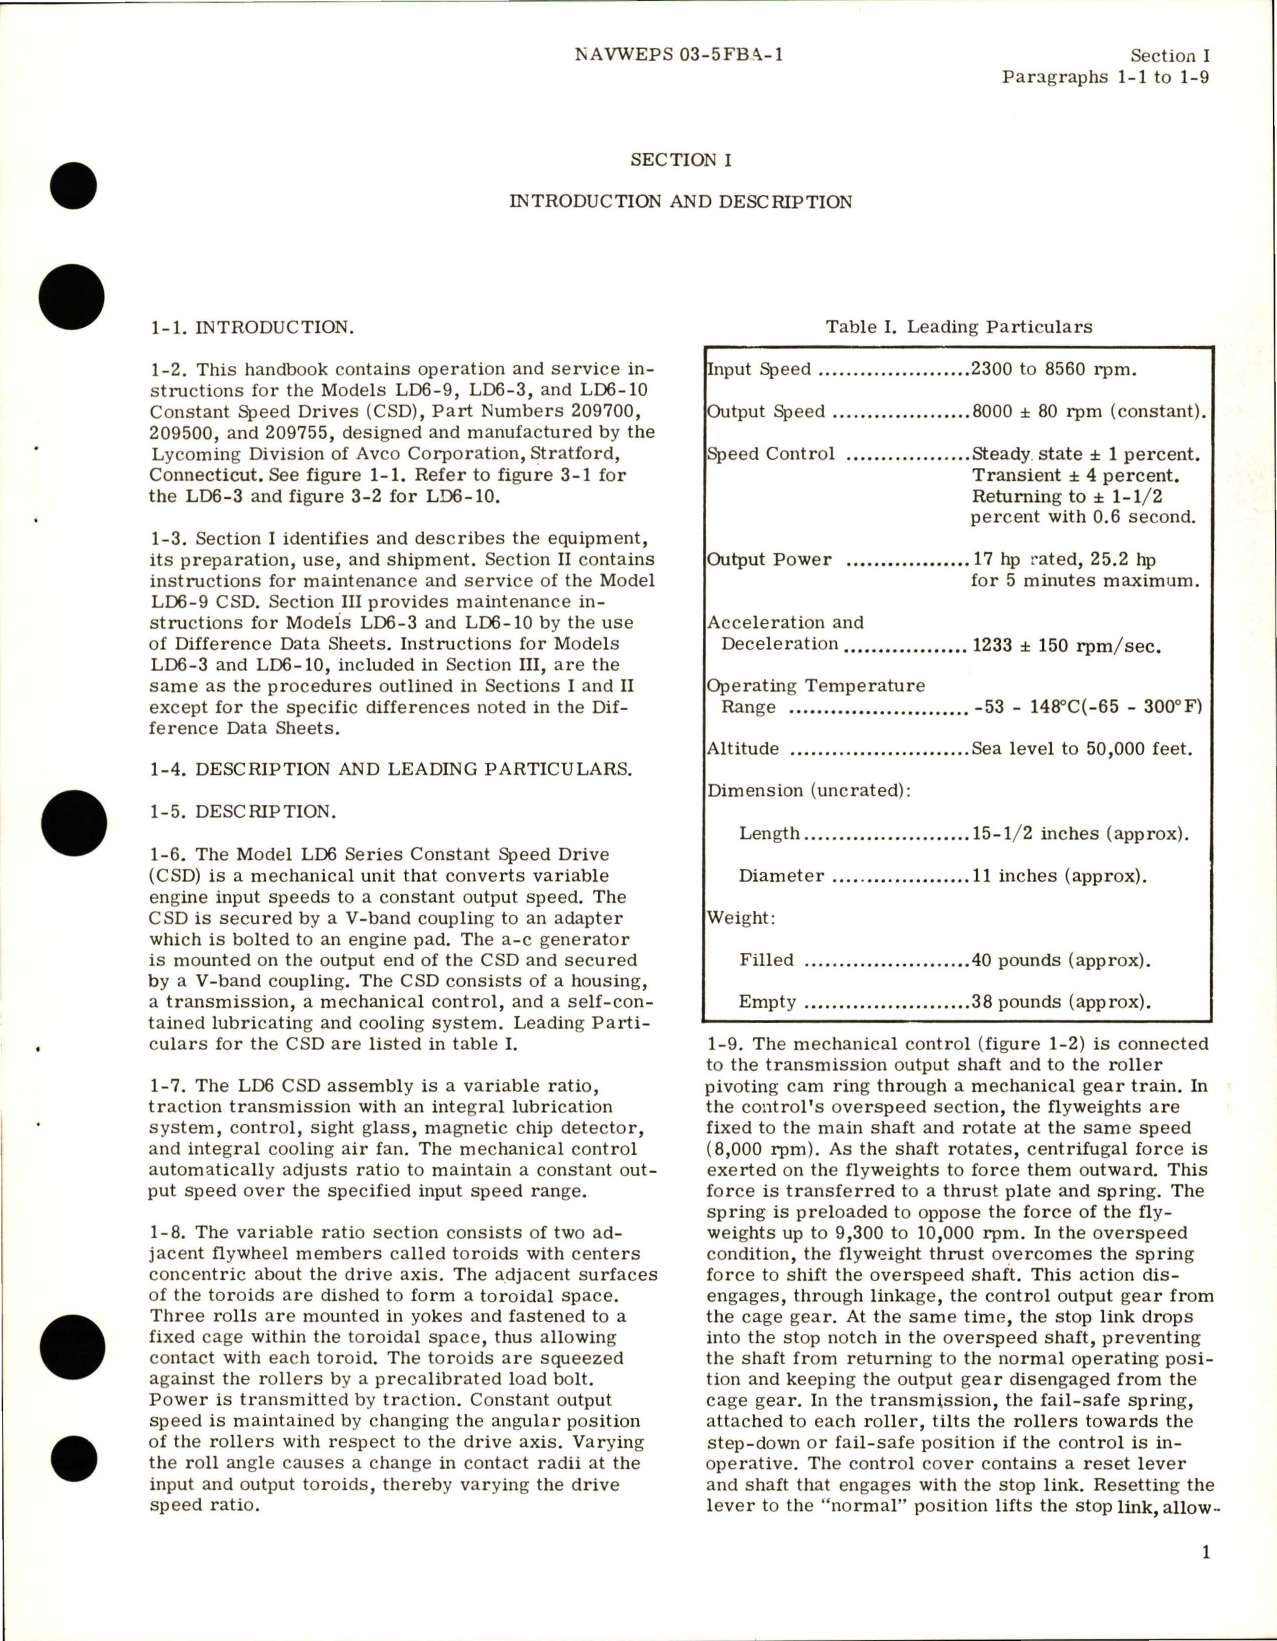 Sample page 5 from AirCorps Library document: Operation and Maintenance Instructions for Constant Speed Drive - Model LD6-3, LD6-9, and LD6-10